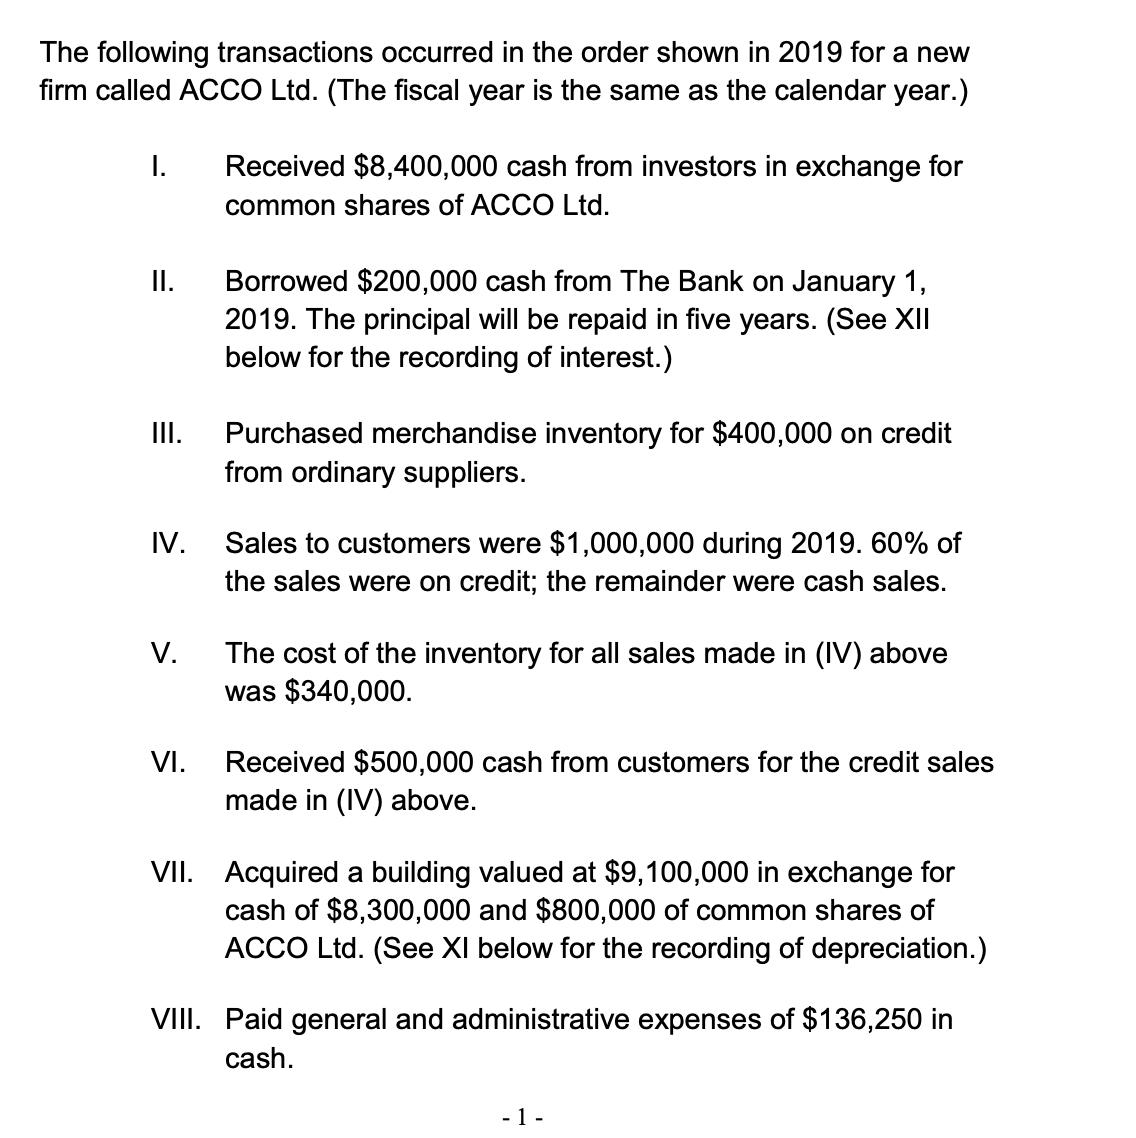 The following transactions occurred in the order shown in 2019 for a new firm called ACCO Ltd. (The fiscal